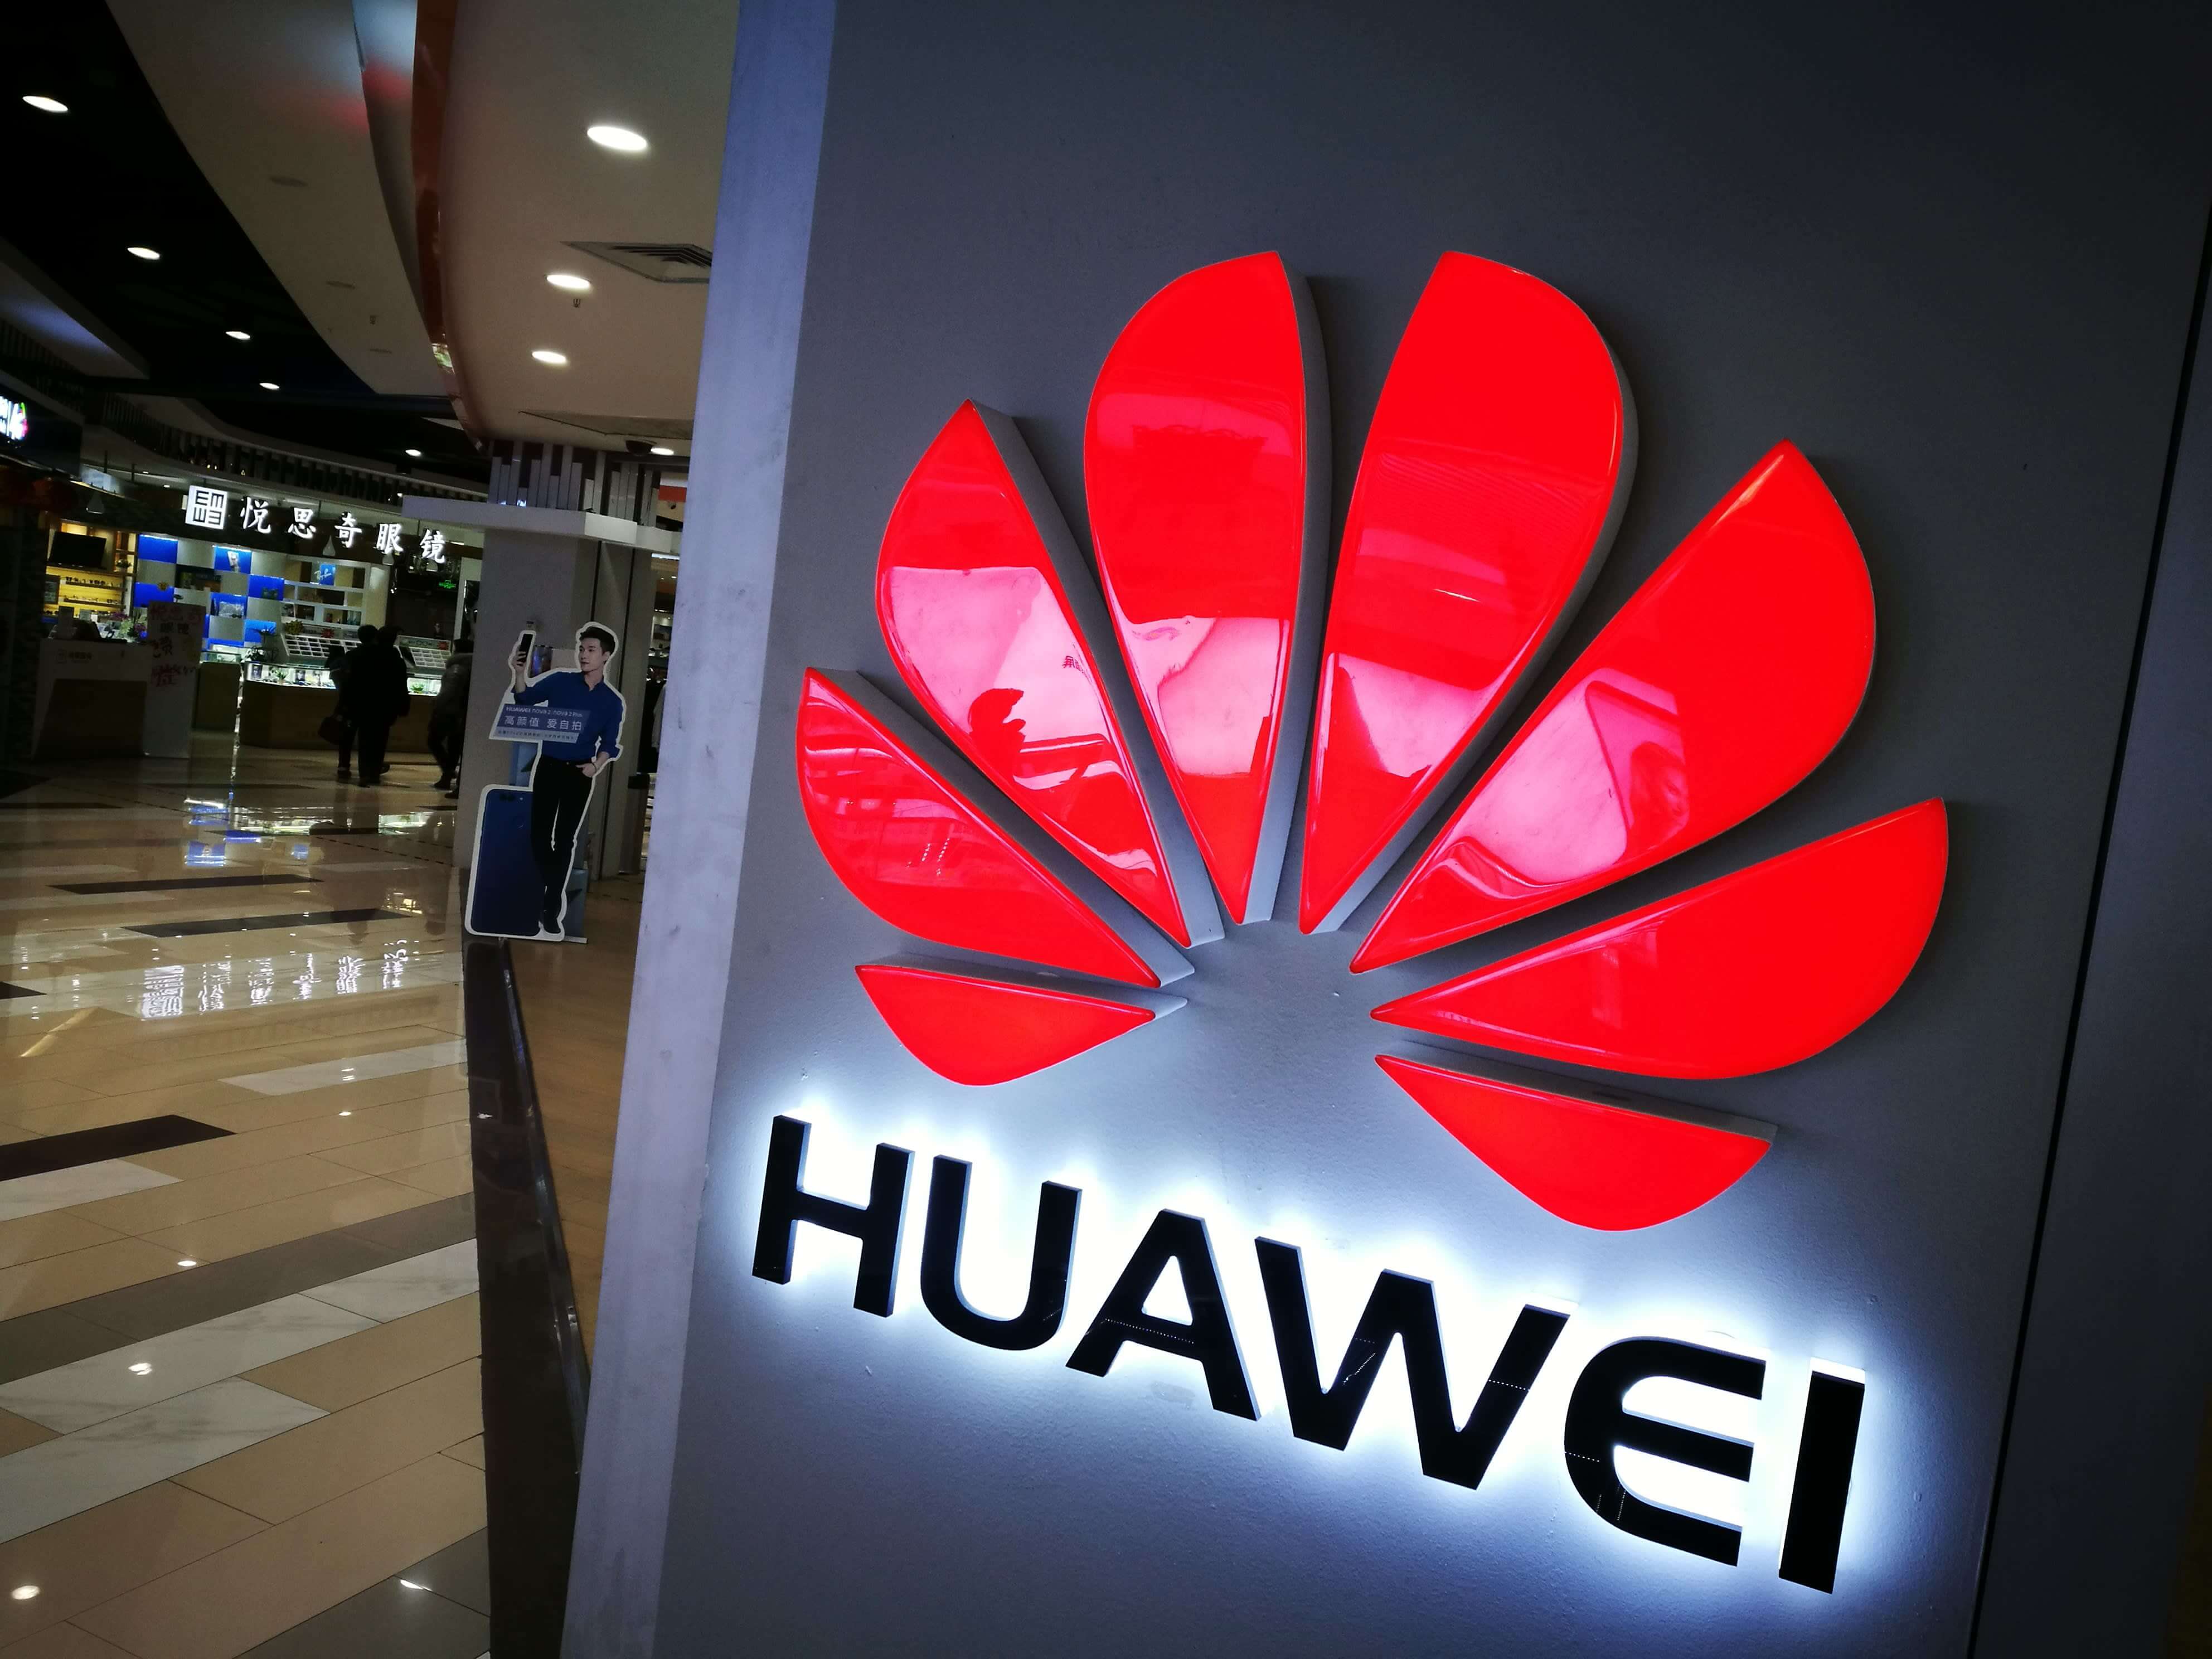 US threatens to withhold intel if Germany uses Huawei's 5G technology